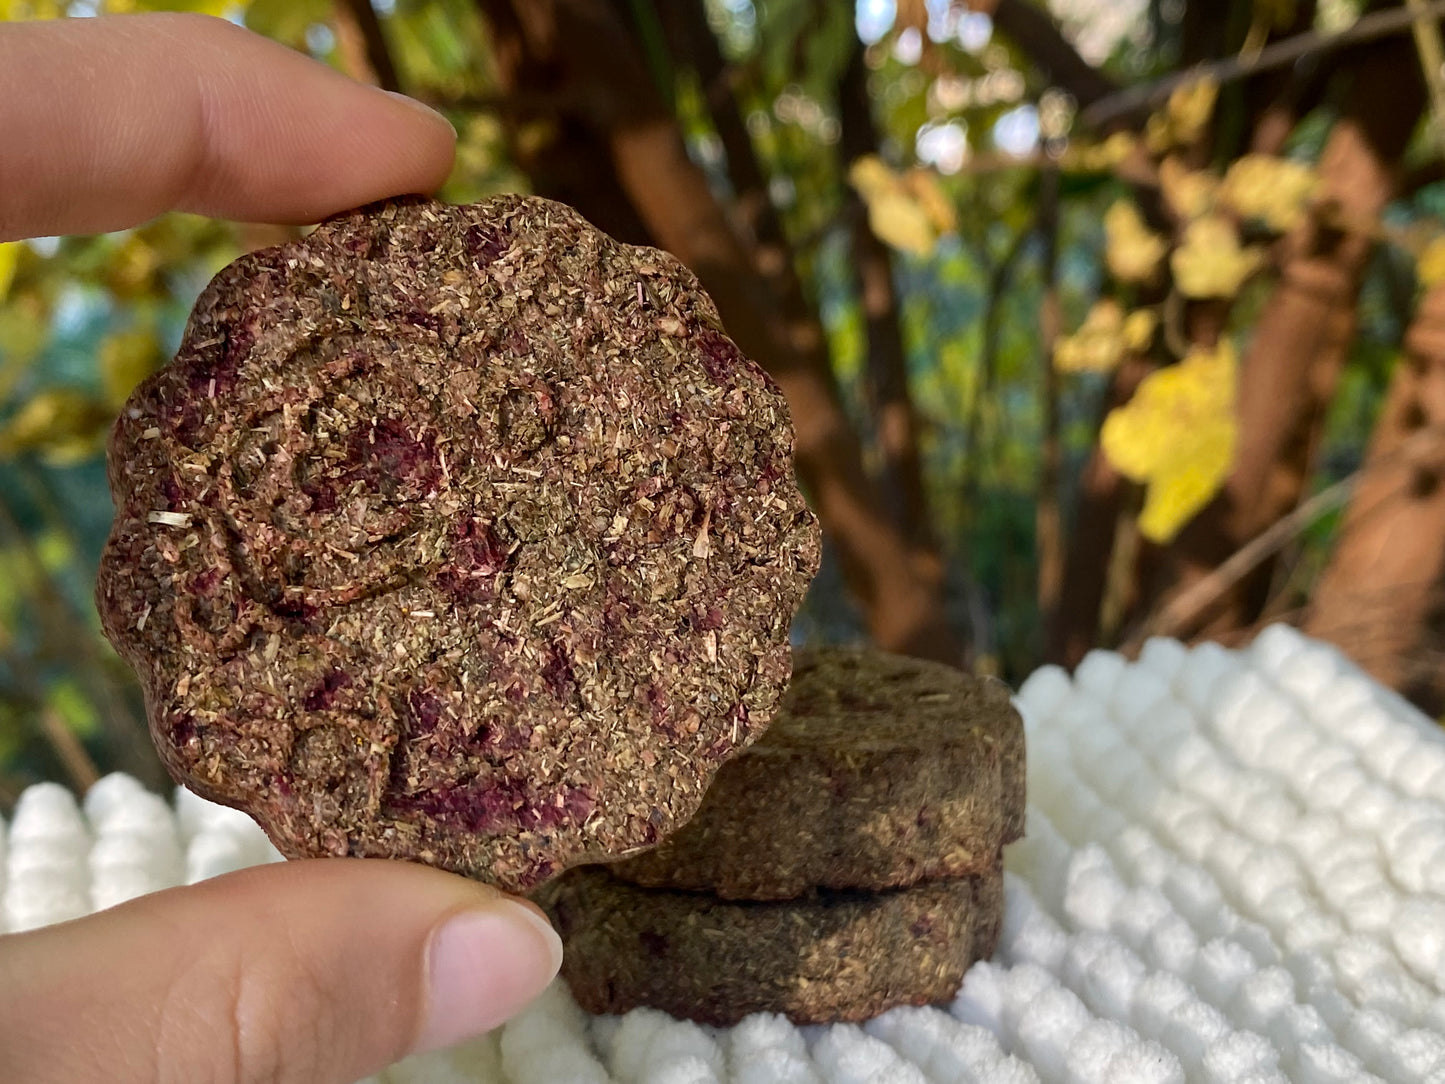 Beet and hay flavored treat